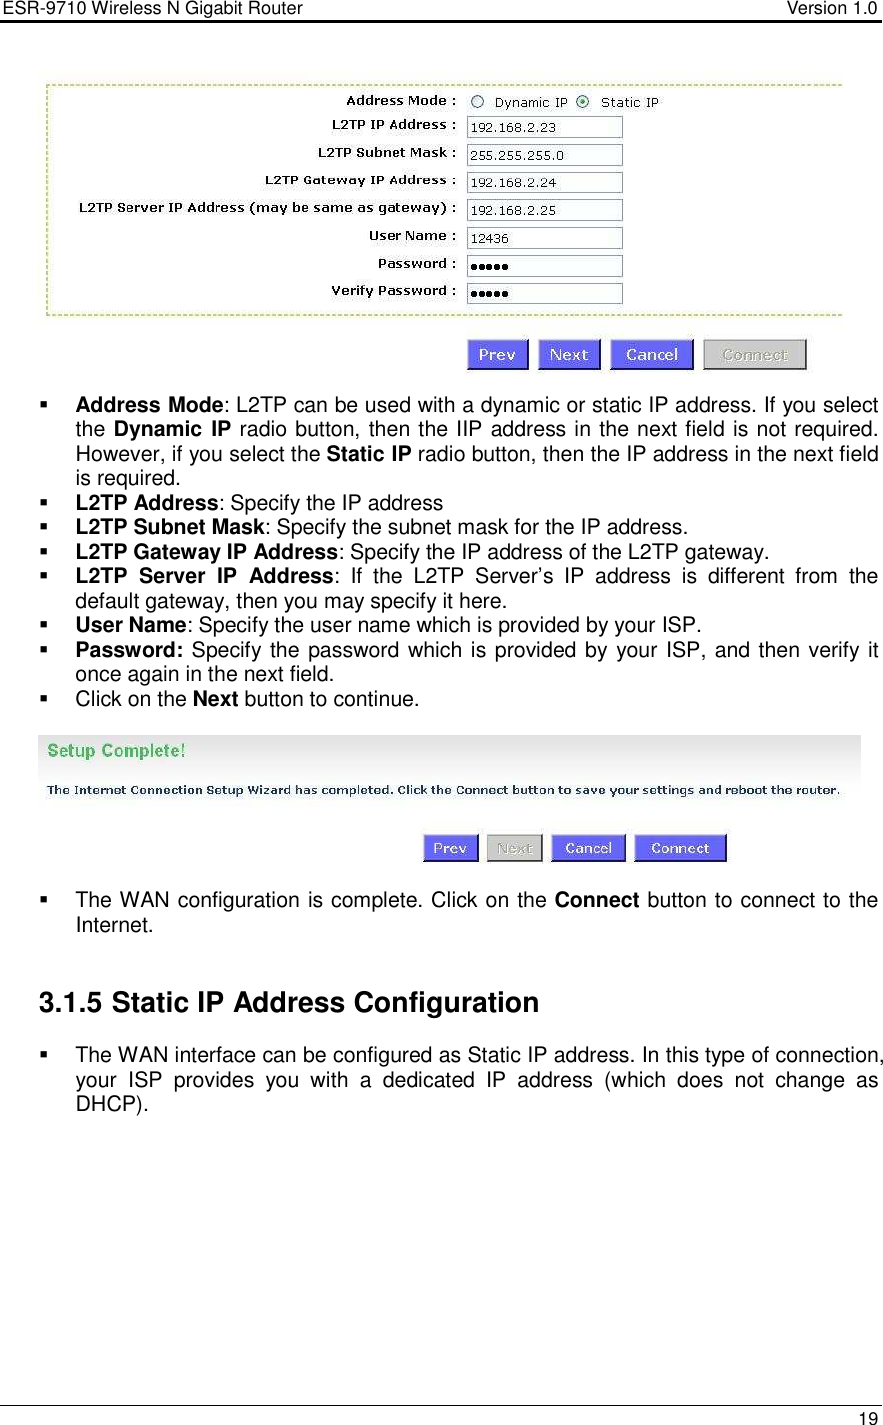 ESR-9710 Wireless N Gigabit Router                                    Version 1.0    19    Address Mode: L2TP can be used with a dynamic or static IP address. If you select the Dynamic IP radio button, then the IIP address in the next field is not required. However, if you select the Static IP radio button, then the IP address in the next field is required.     L2TP Address: Specify the IP address  L2TP Subnet Mask: Specify the subnet mask for the IP address.   L2TP Gateway IP Address: Specify the IP address of the L2TP gateway.  L2TP  Server  IP  Address:  If  the  L2TP  Server’s  IP  address  is  different  from  the default gateway, then you may specify it here.    User Name: Specify the user name which is provided by your ISP.  Password: Specify the password which is provided by your ISP, and then verify it once again in the next field.    Click on the Next button to continue.      The WAN configuration is complete. Click on the Connect button to connect to the Internet.    3.1.5 Static IP Address Configuration    The WAN interface can be configured as Static IP address. In this type of connection, your  ISP  provides  you  with  a  dedicated  IP  address  (which  does  not  change  as DHCP).   